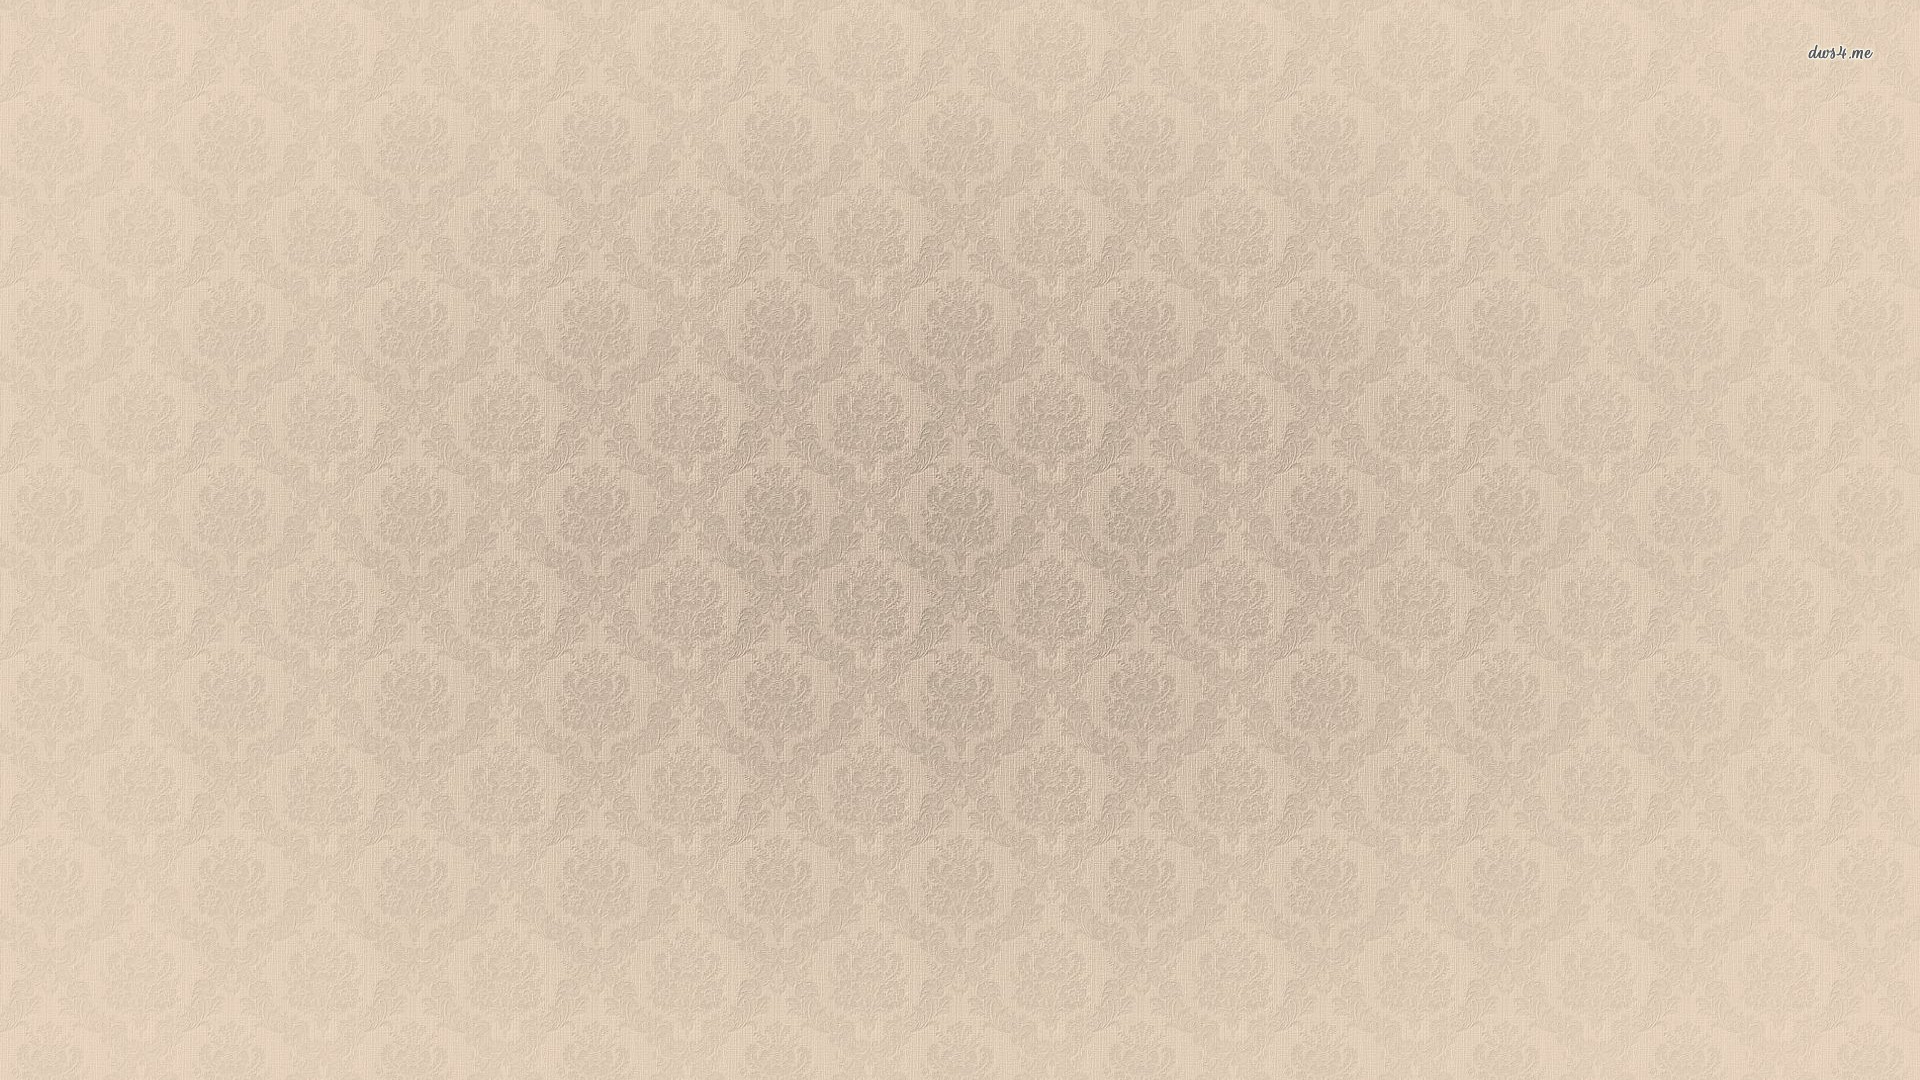 Square Pattern Embossed Wallpaper HD Walls Find